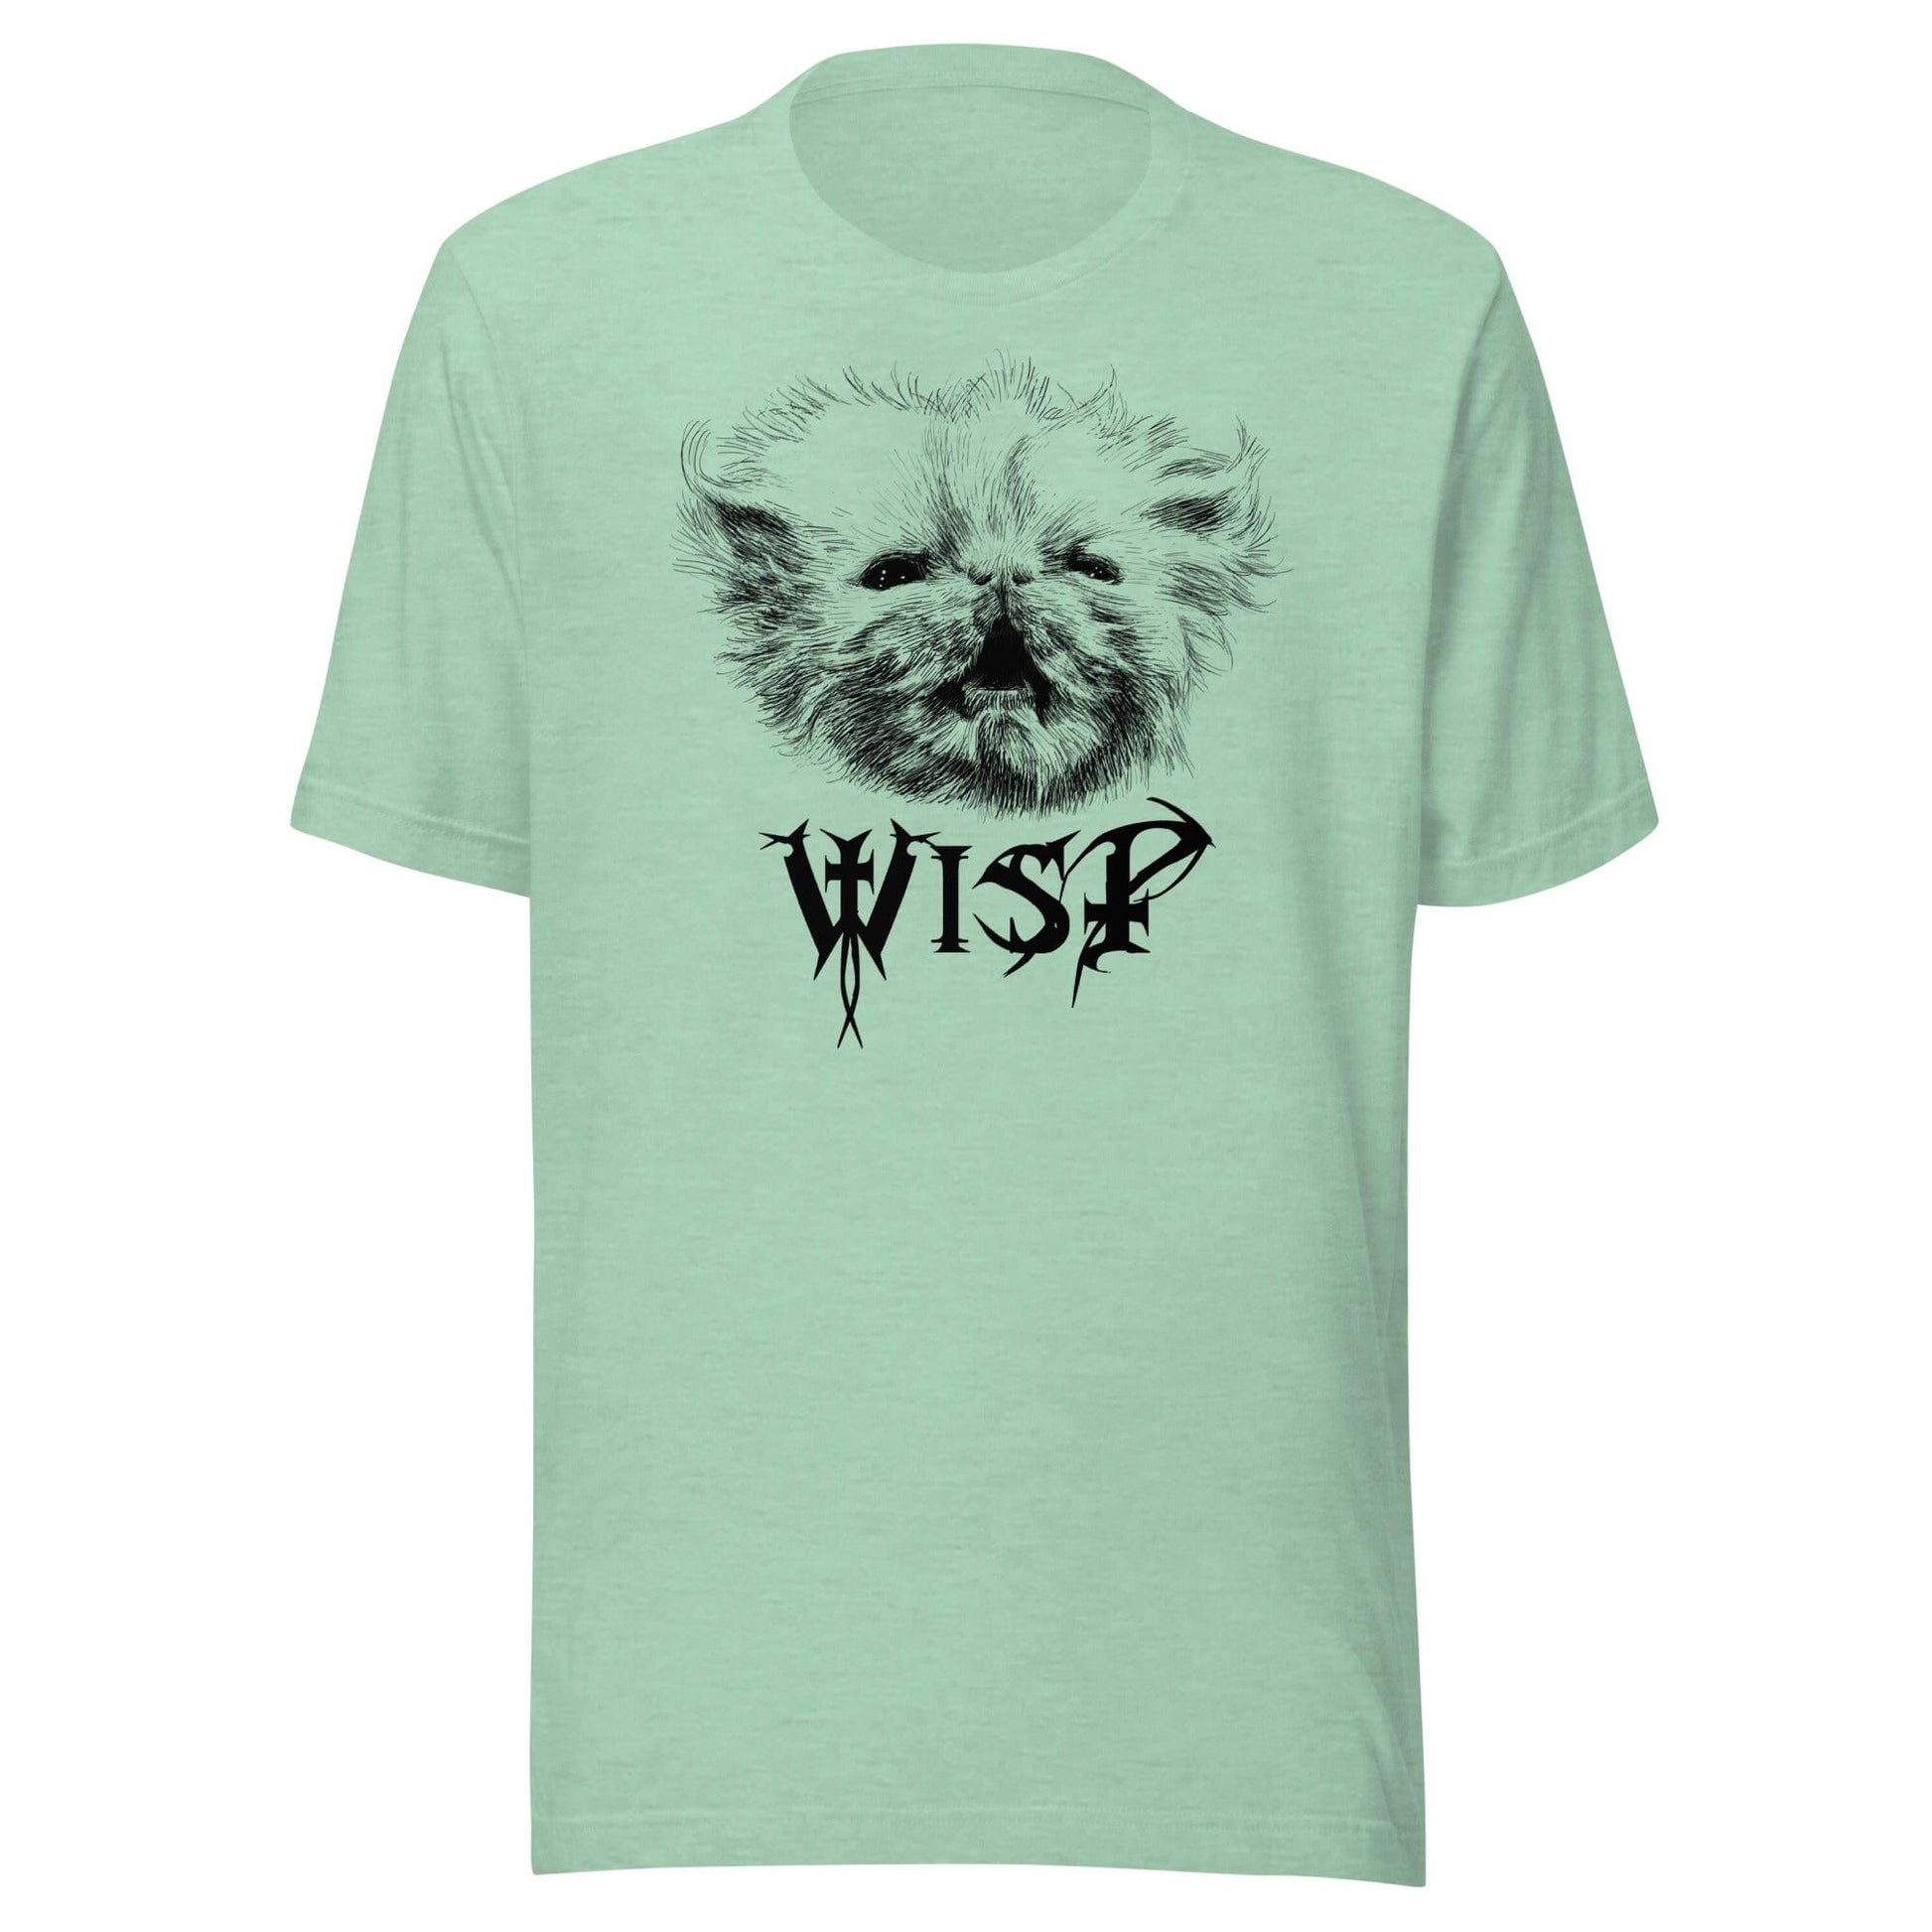 Metal Wisp T-Shirt [Unfoiled] (All net proceeds go to Rags to Riches Animal Rescue) JoyousJoyfulJoyness Heather Prism Mint XS 